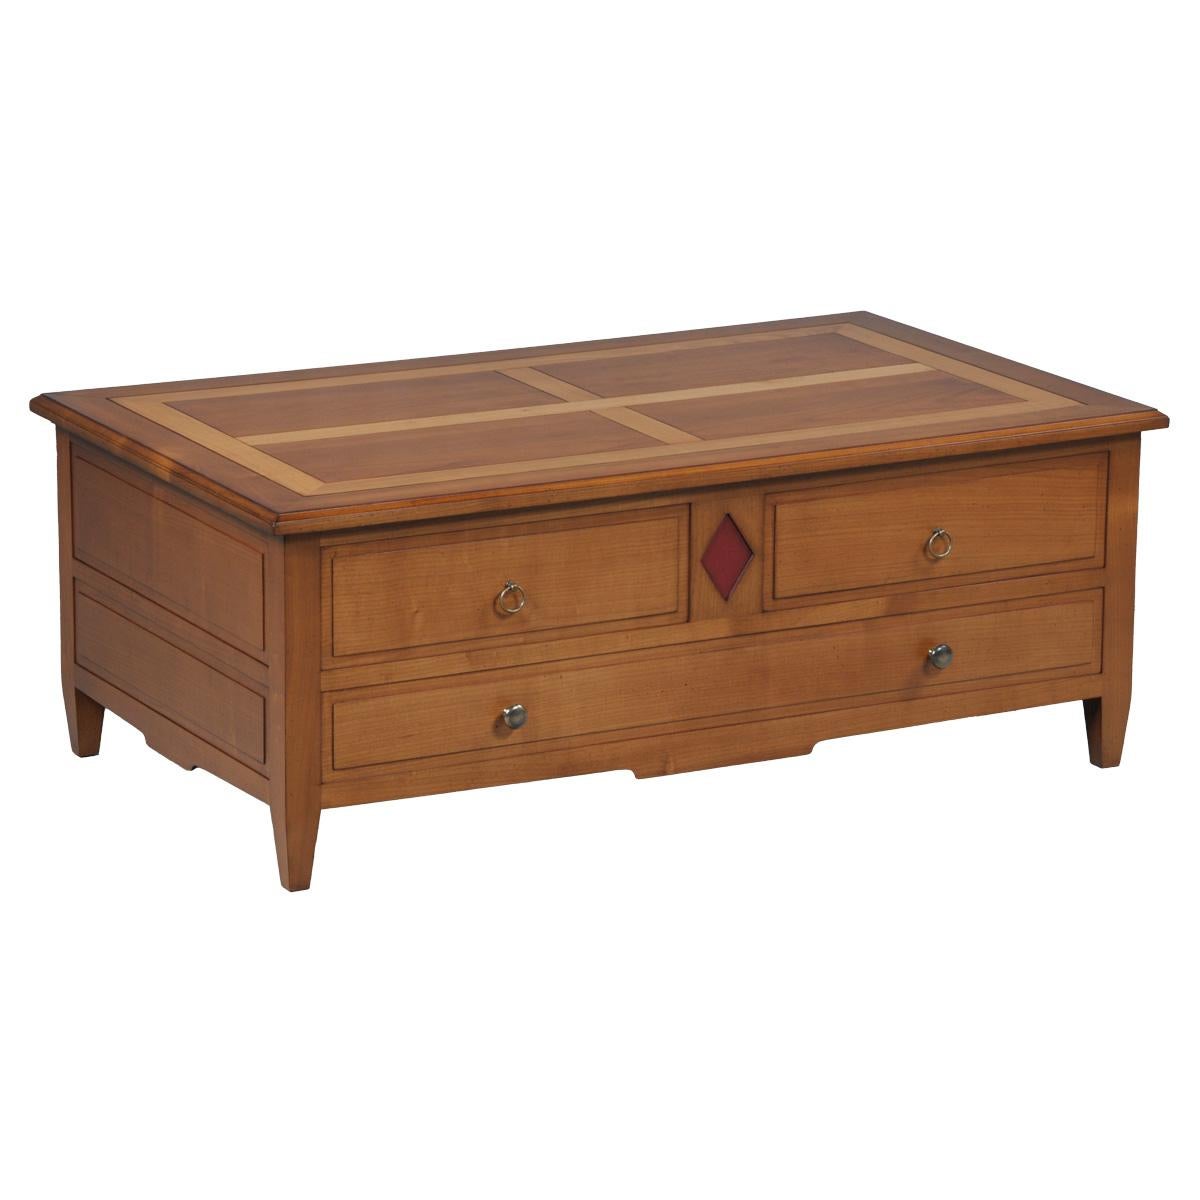 Liftable coffee table in solid cherry with storage for bottles glasses For Sale 4